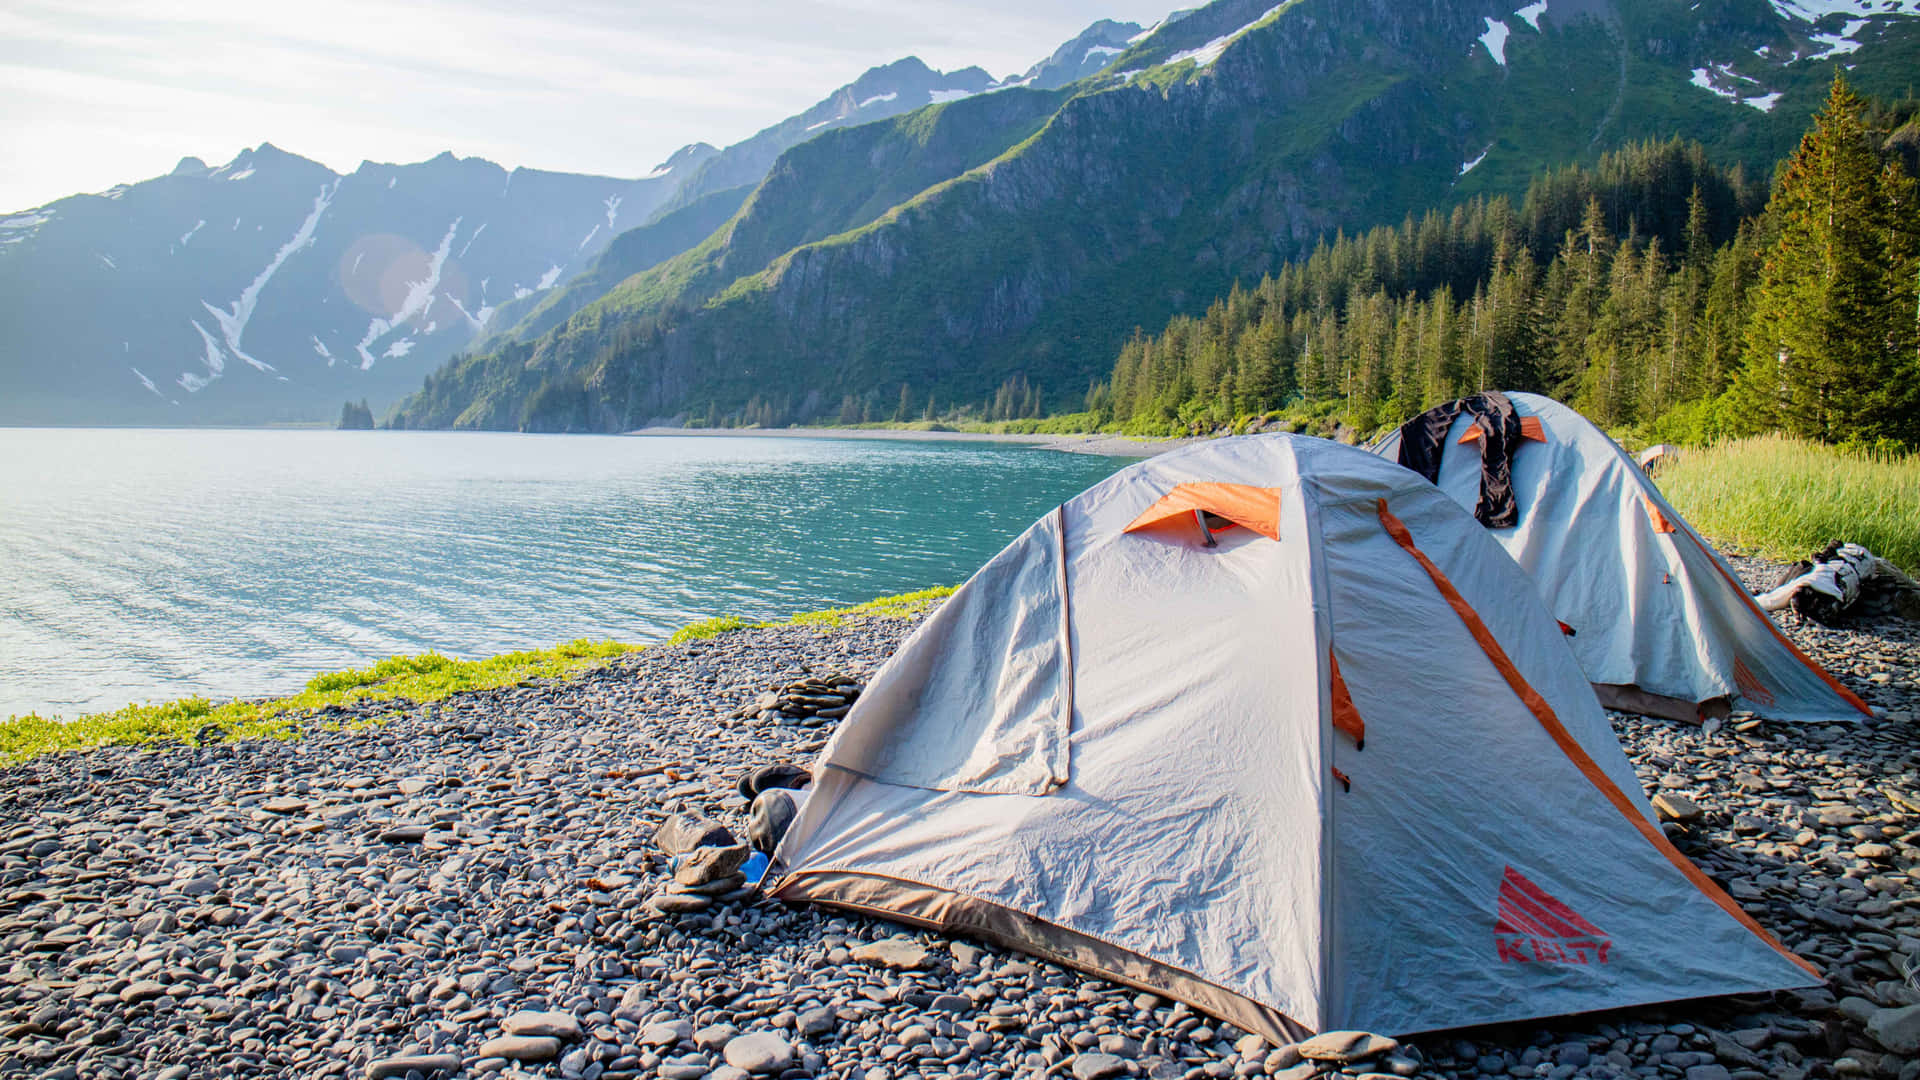 Connect with nature and explore the great outdoors on a camping trip.